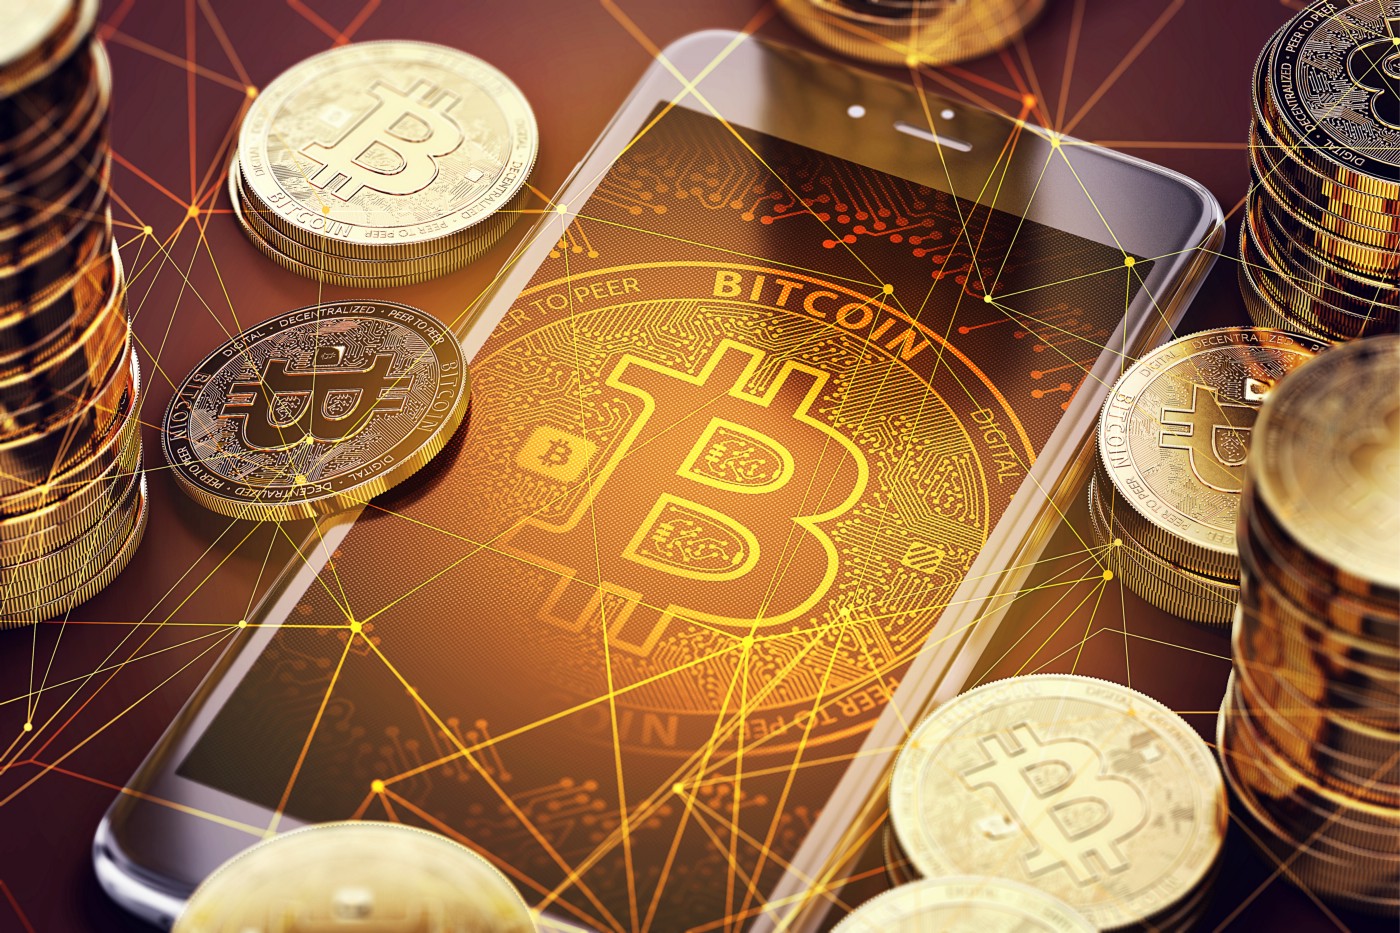 Bitcoin wallpaper on phone and stack of bitcoins around the phone